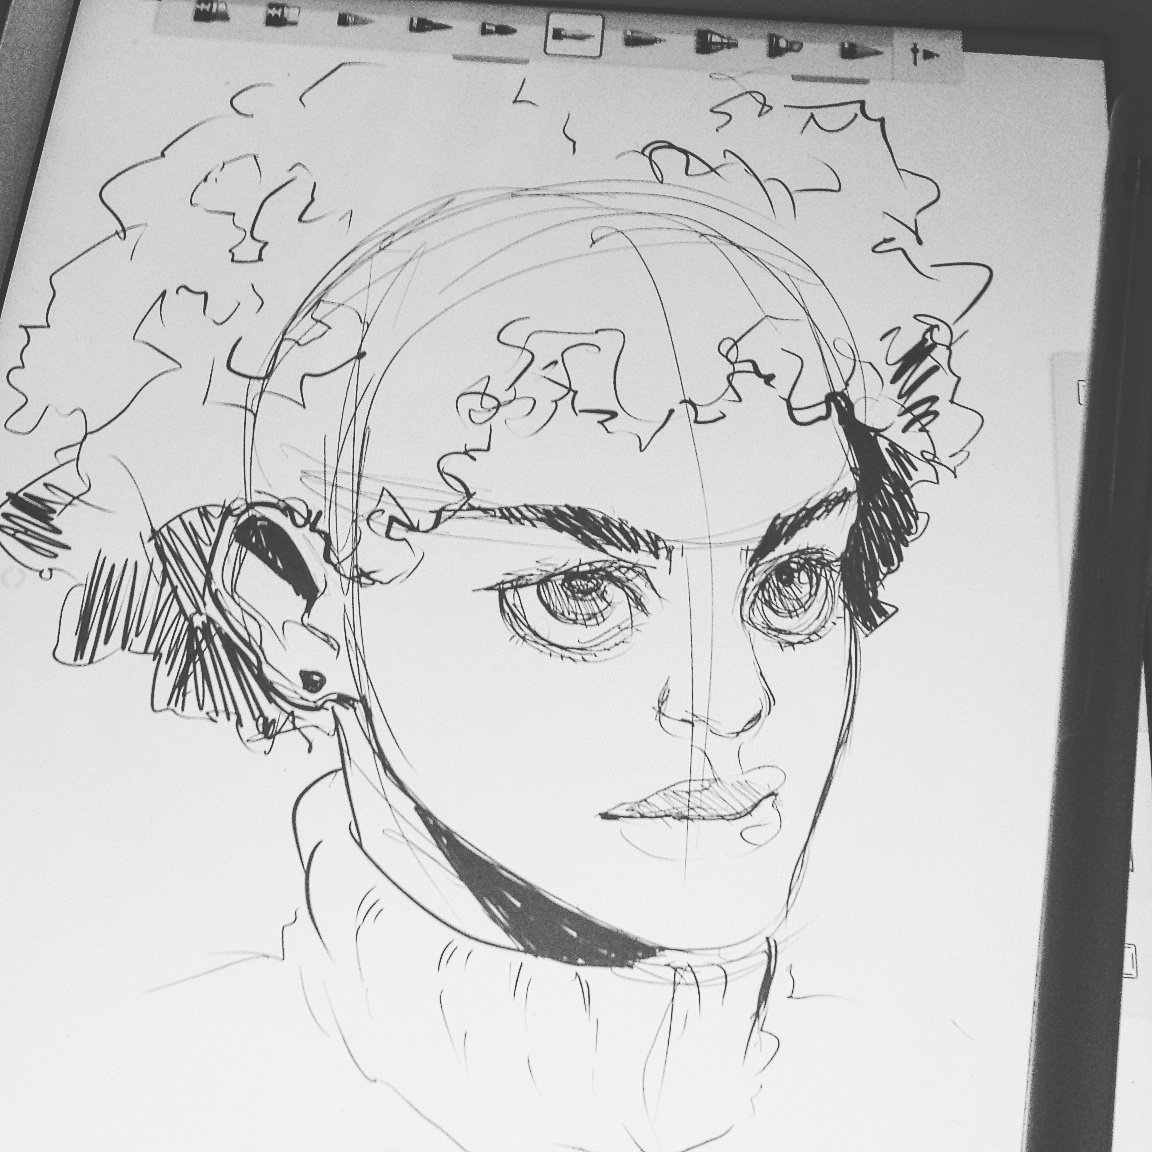 Anothet sketch
This one is a little cooler lol
#portrait #sketch #drawing #draws #face #black #afro #girl #draw #doodle #ipad #applepencil 